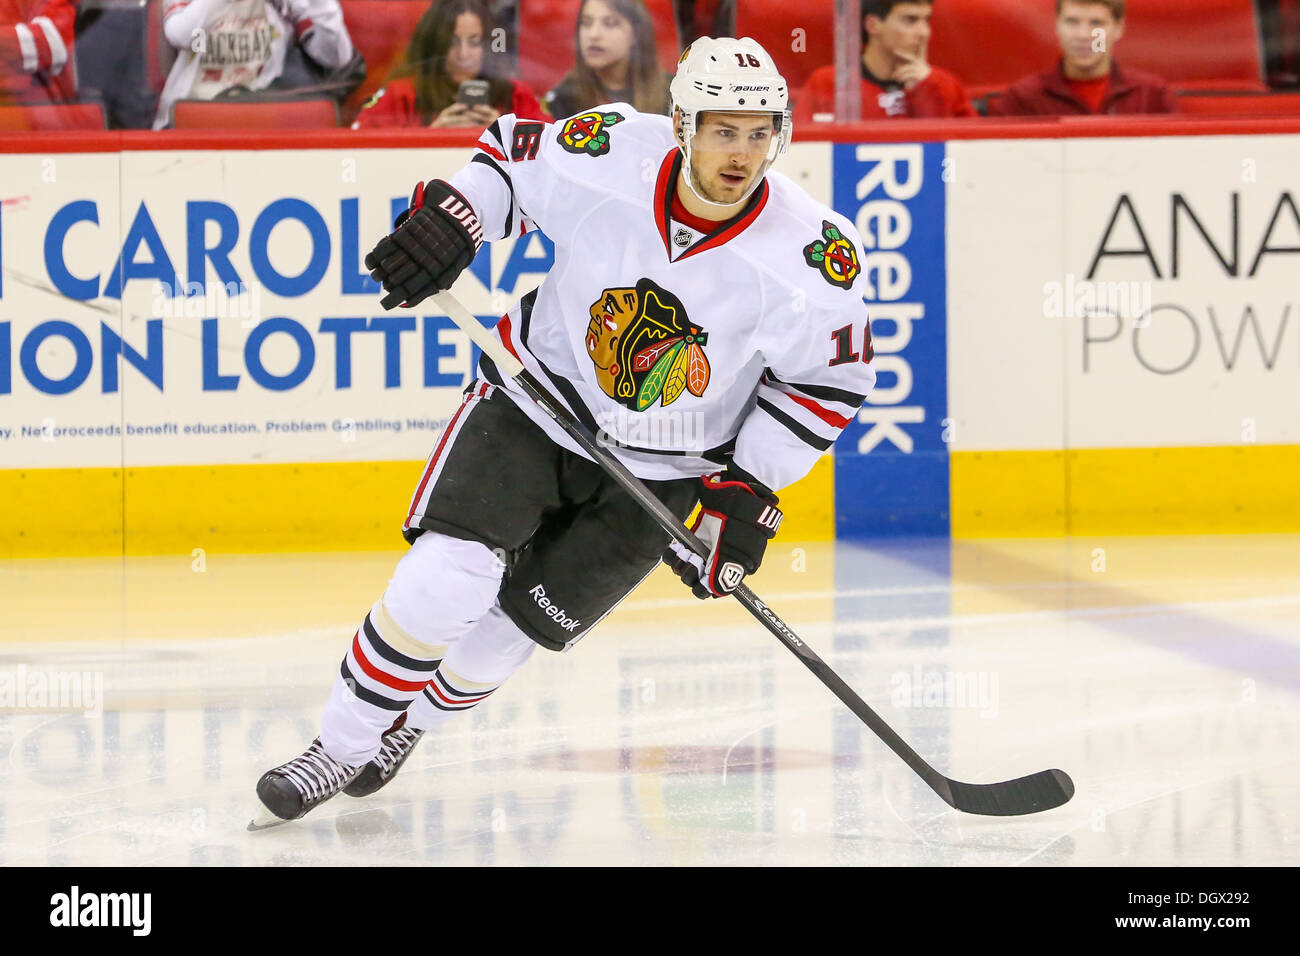 Chicago BlackhawkMarcus Kruger during an NHL hockey game during the 2013-2014 season Stock Photo